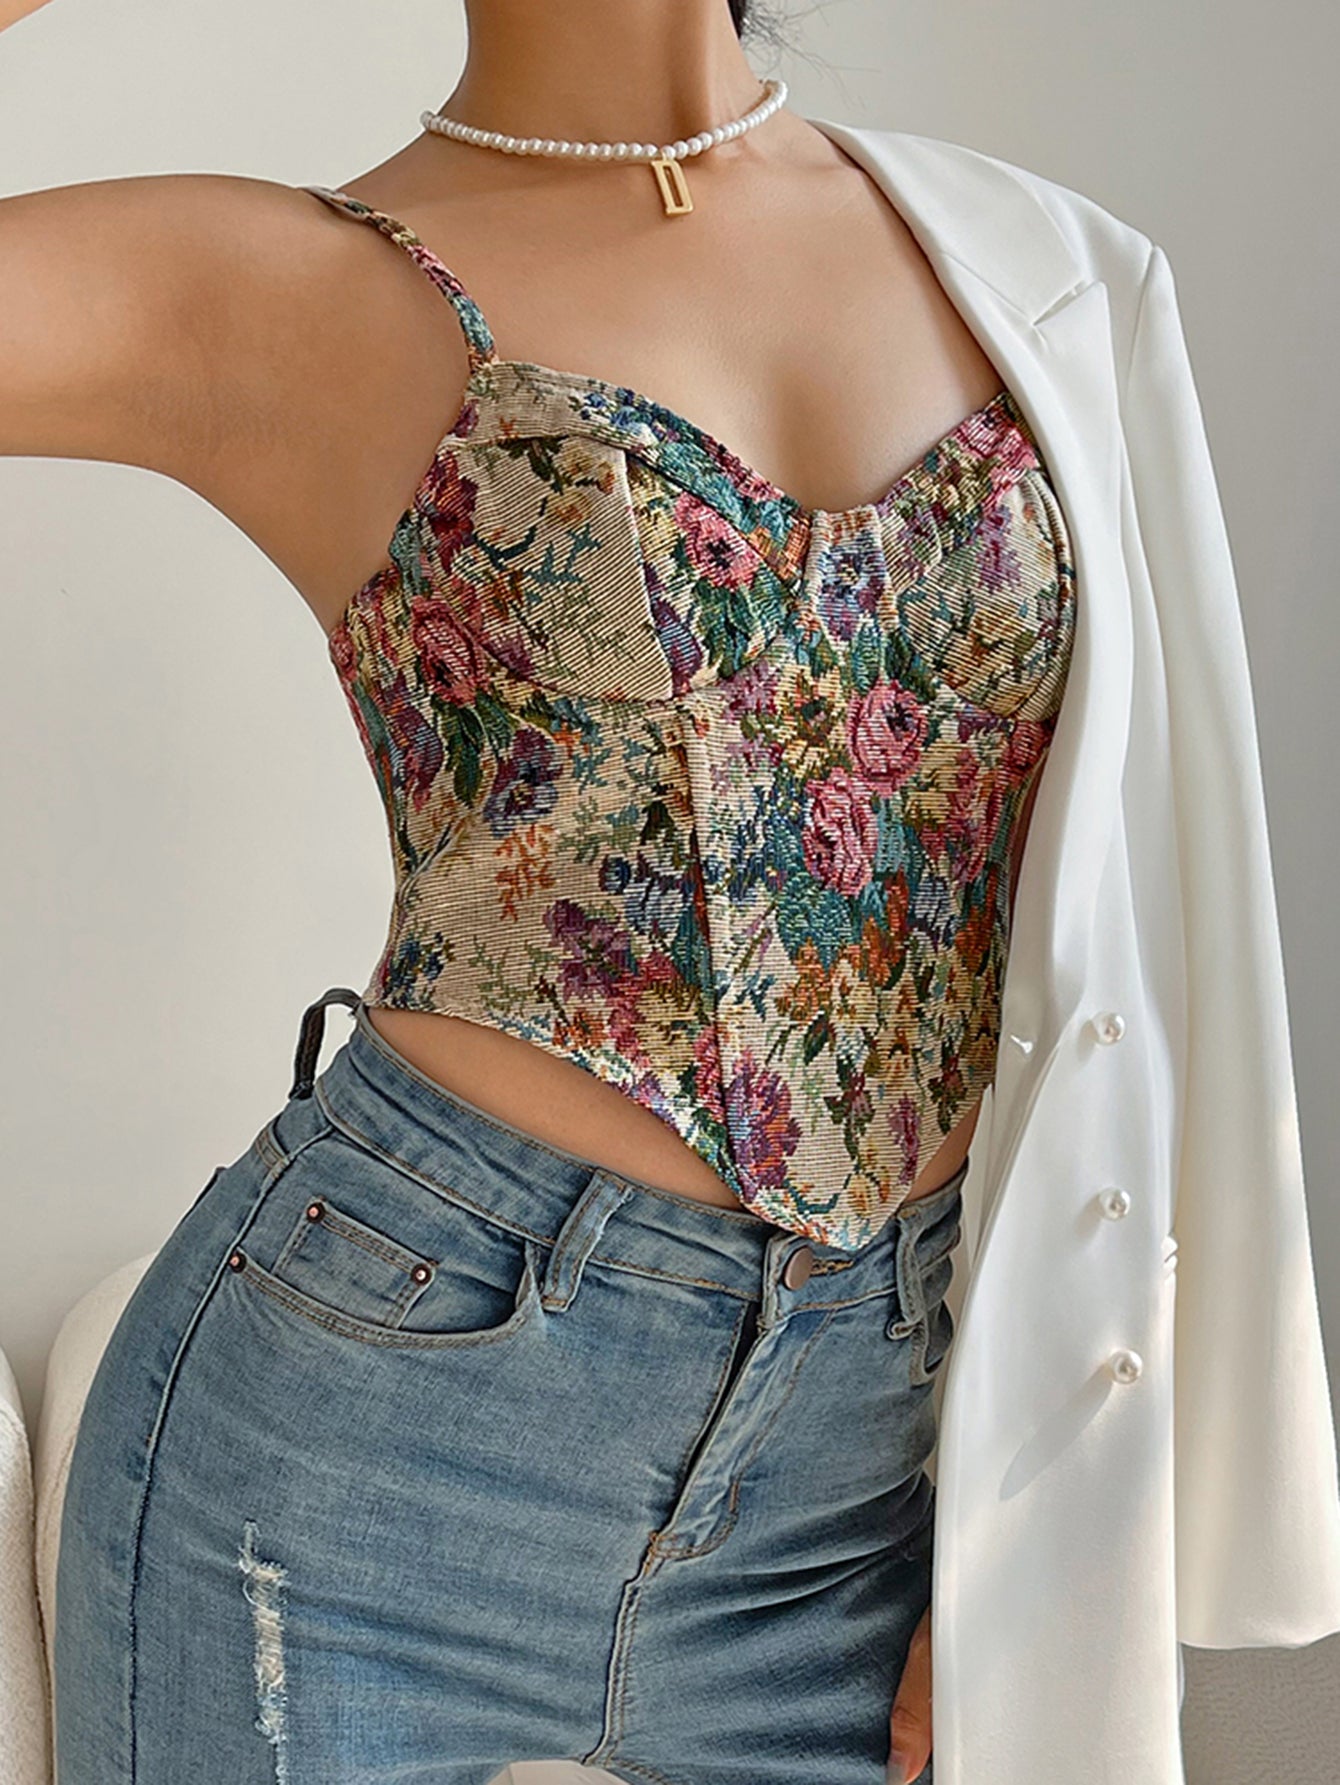 Retro Style Floral Digital Print Camisole Niche French Corset Top for Street Chic